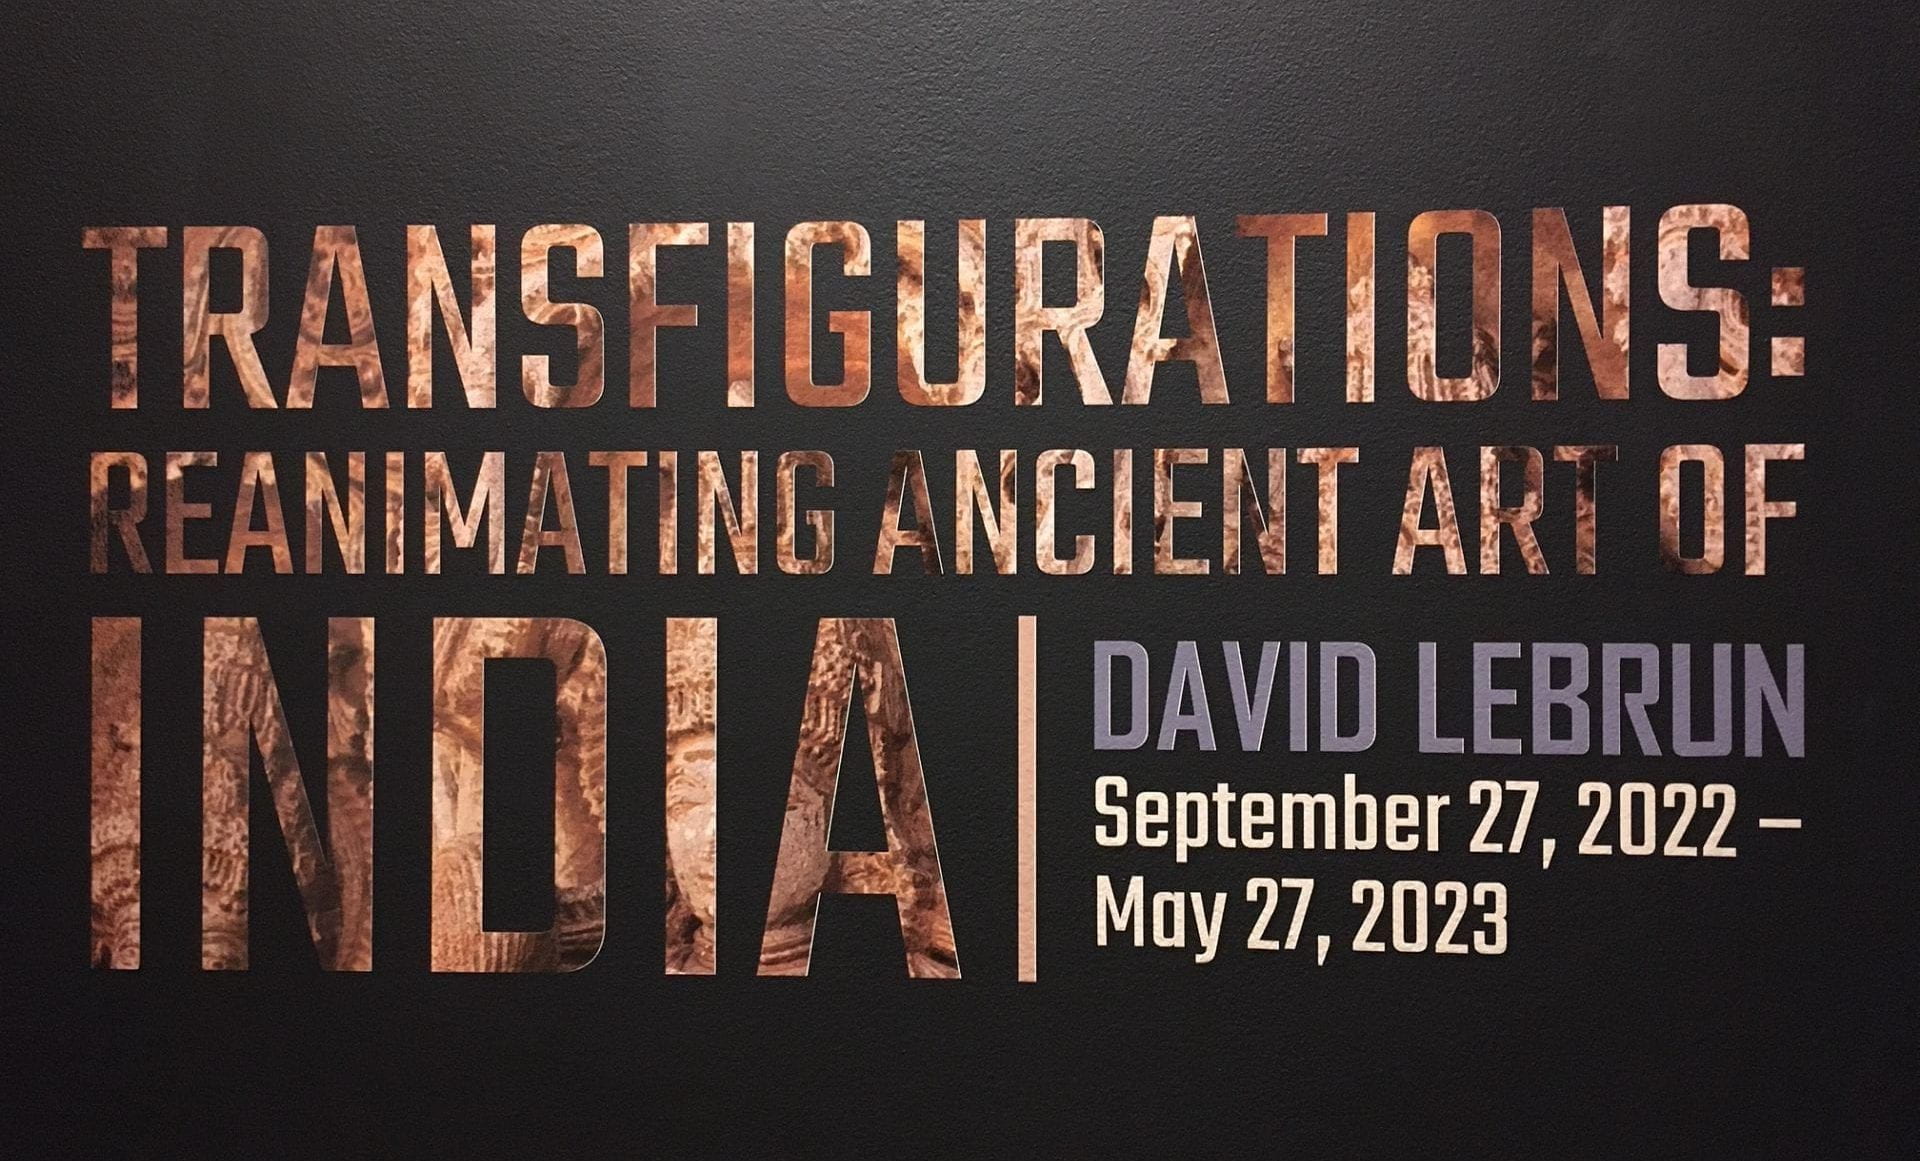 Transfigurations: Reanimating Ancient Art of India by David Lebrun, gallery title wall photo